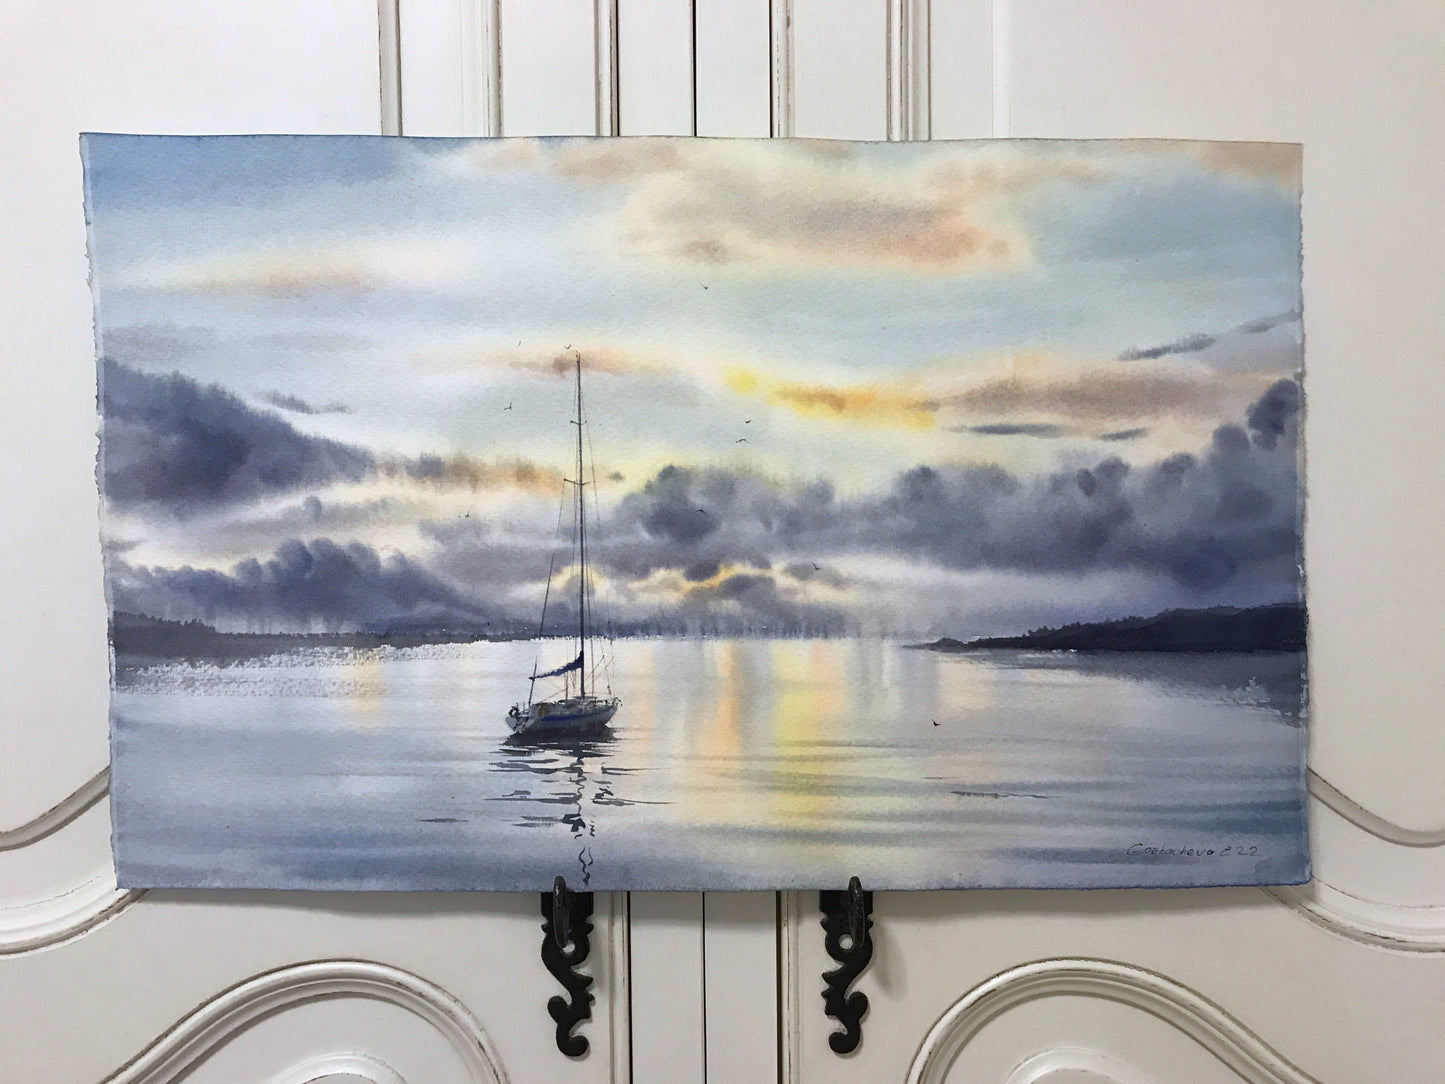 Seascape Painting Watercolor Original - Yachts at sunset #8 - 13x22 in